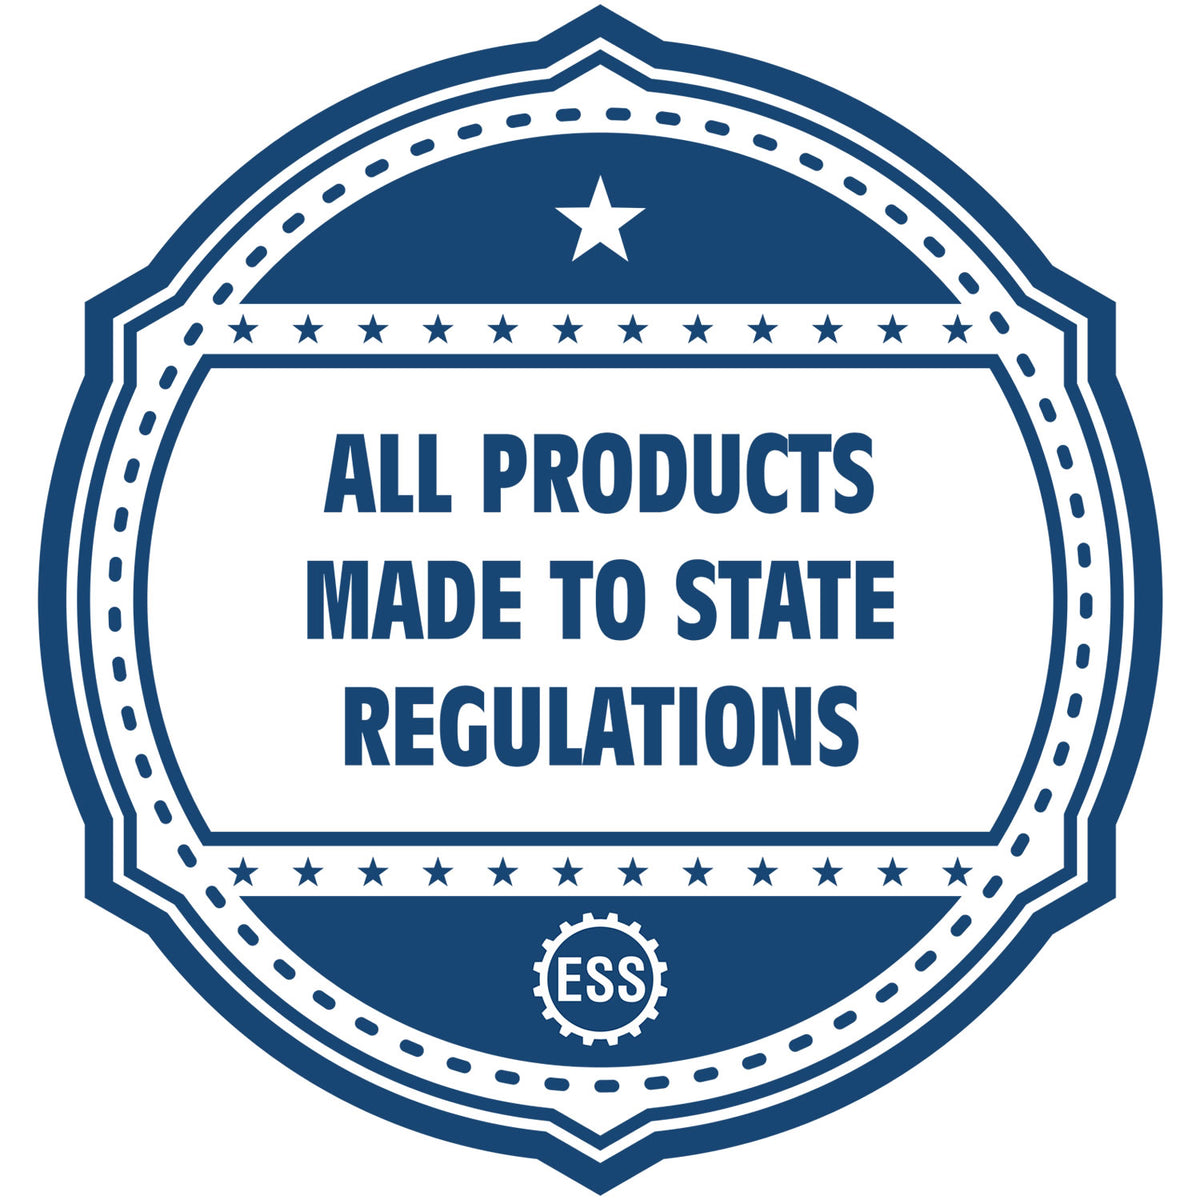 An icon or badge element for the Florida Landscape Architectural Seal Stamp showing that this product is made in compliance with state regulations.